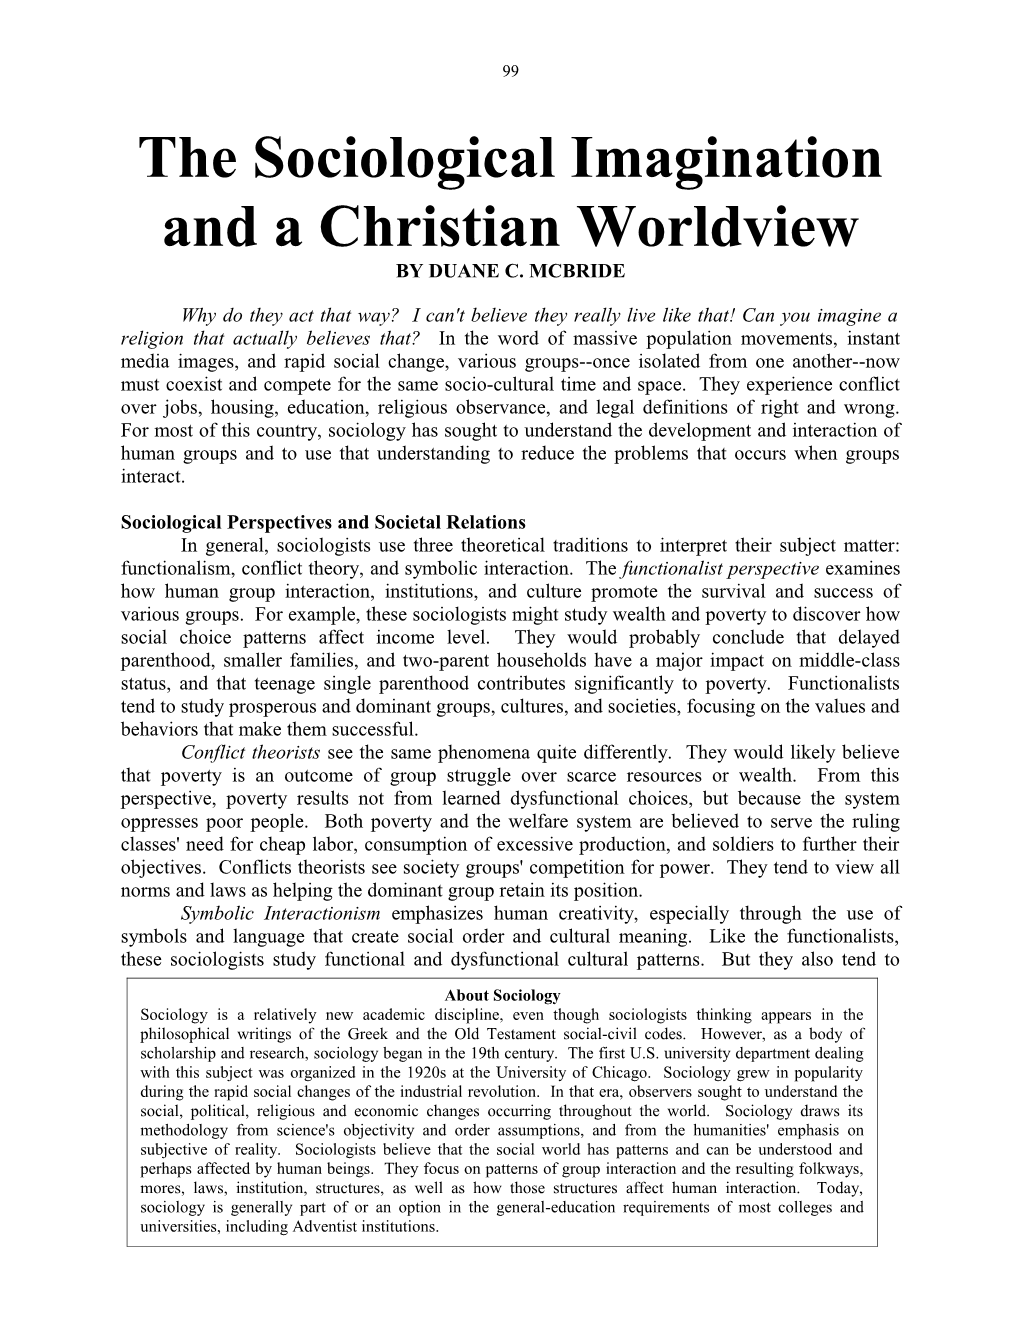 The Sociological Imagination and a Christian Worldview